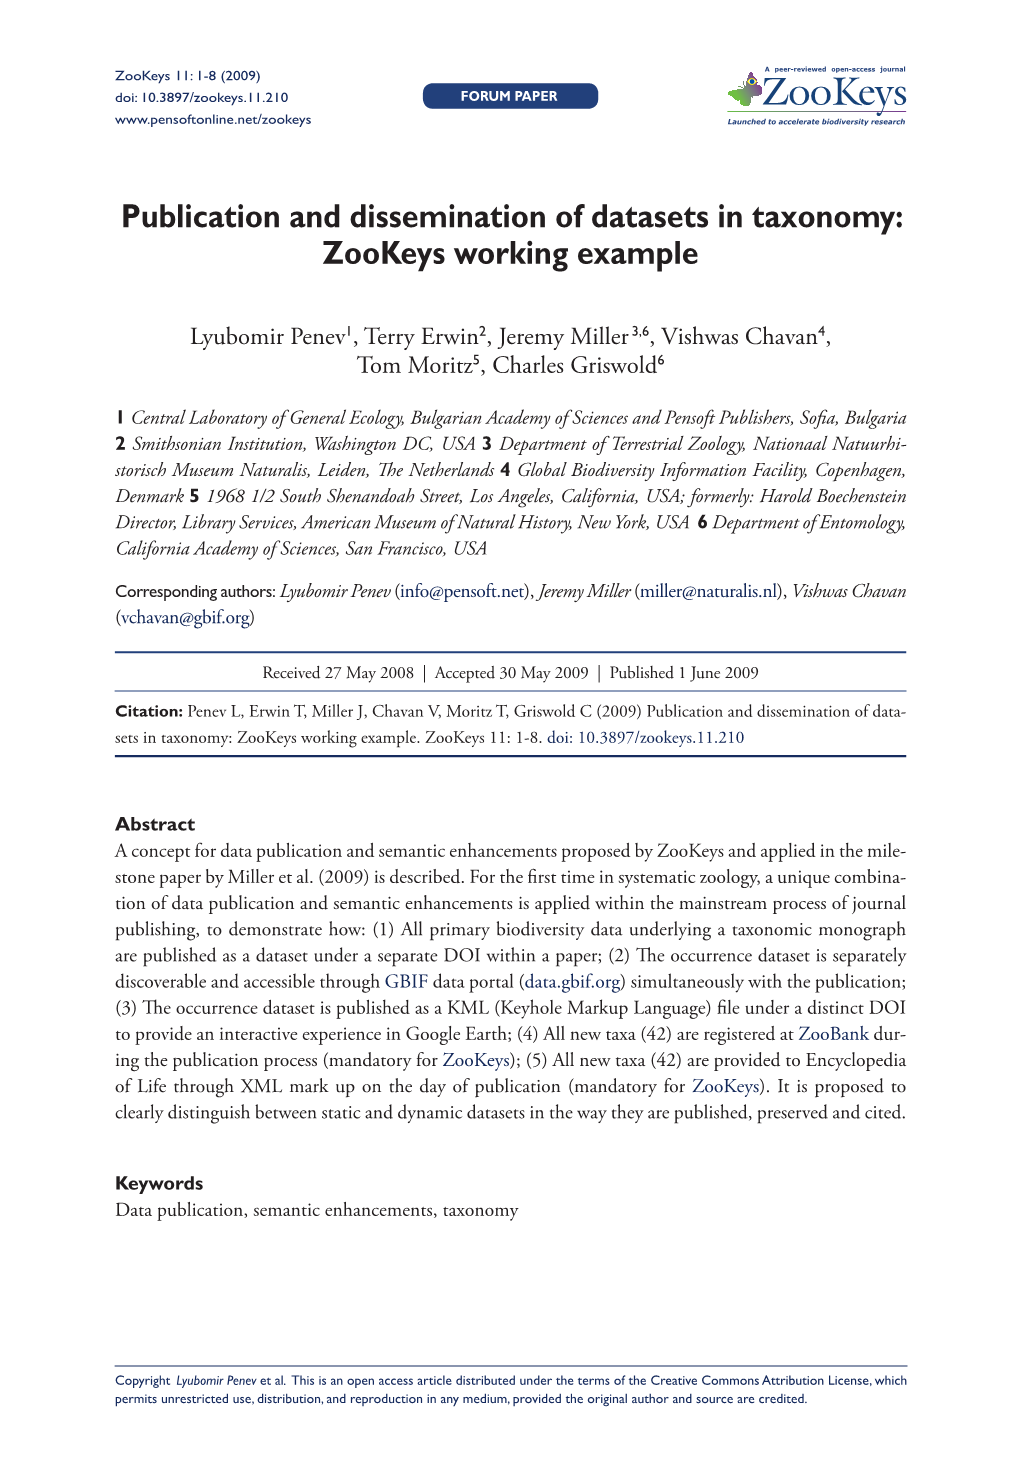 Publication and Dissemination of Datasets in Taxonomy: Zookeys Working Example